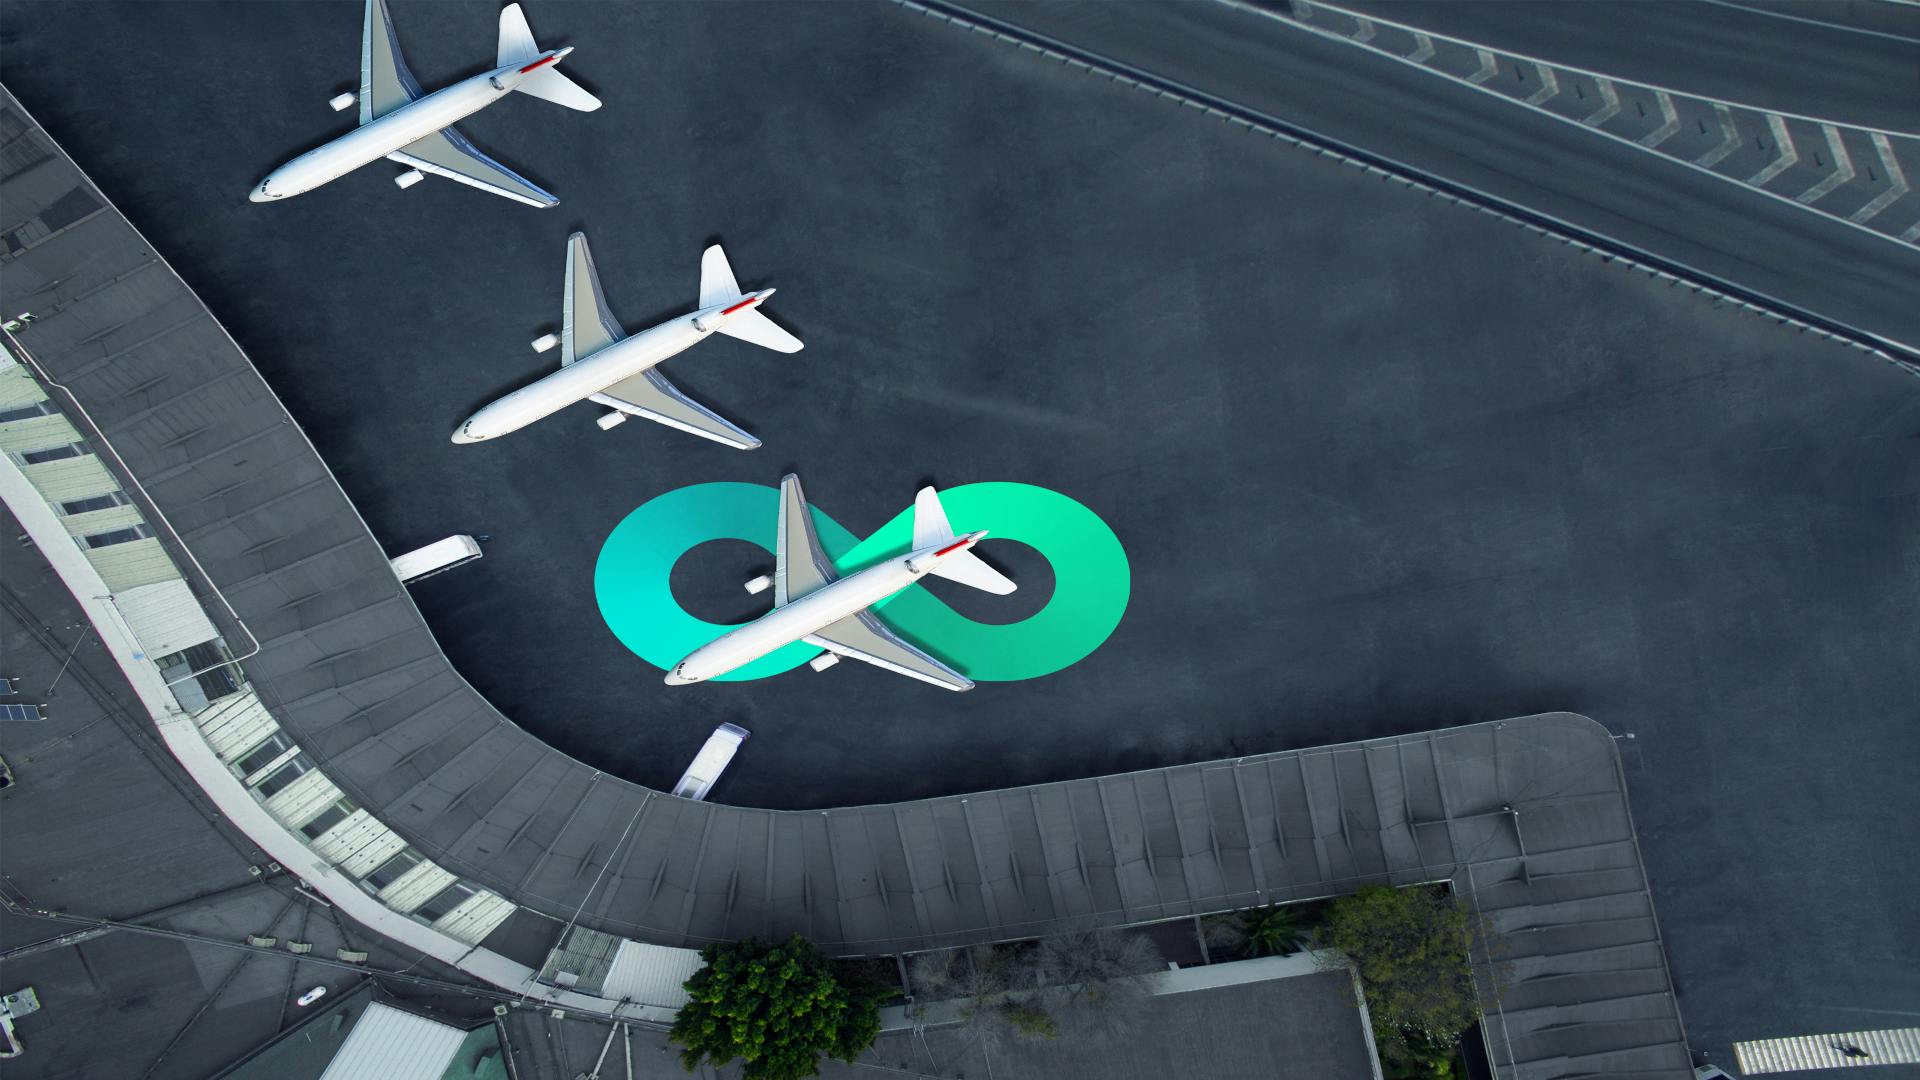 Multiple airplanes are shown parked at an airport from overhead. An infinity symbol sits underneath one of the planes, representing digital transformation.